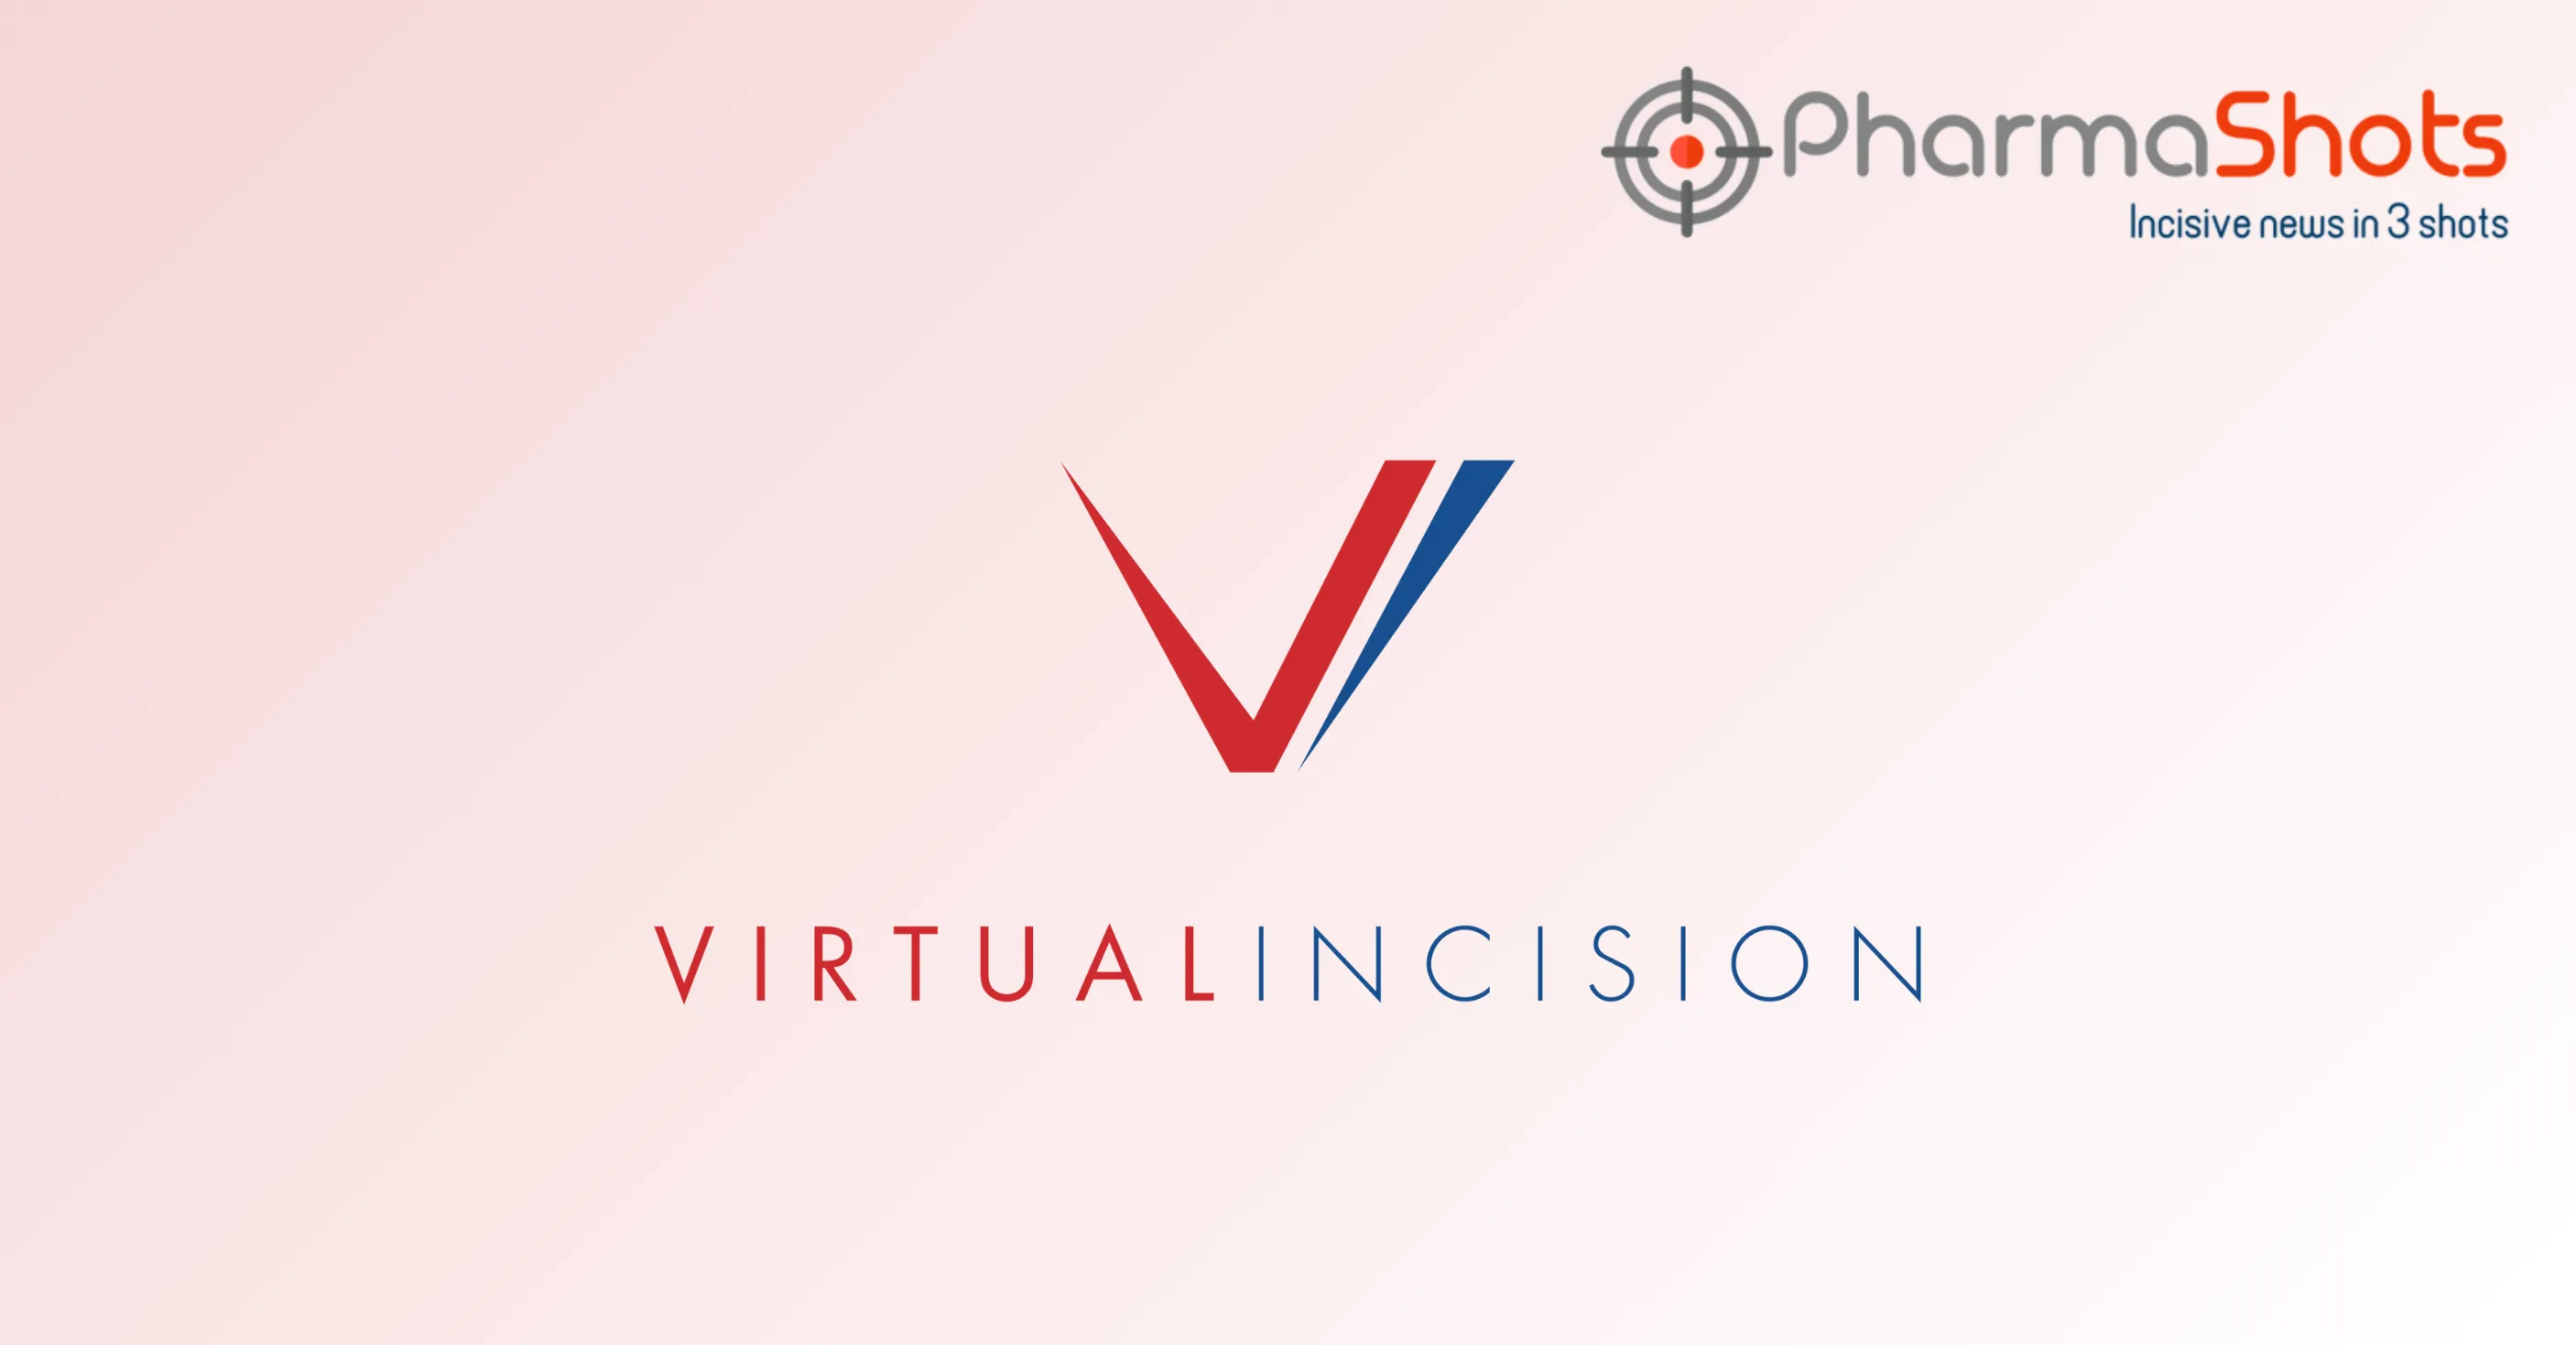 The US FDA Grants Marketing Authorization to Virtual Incision’s MIRA Surgical System for Adults Undergoing Colectomy Procedures